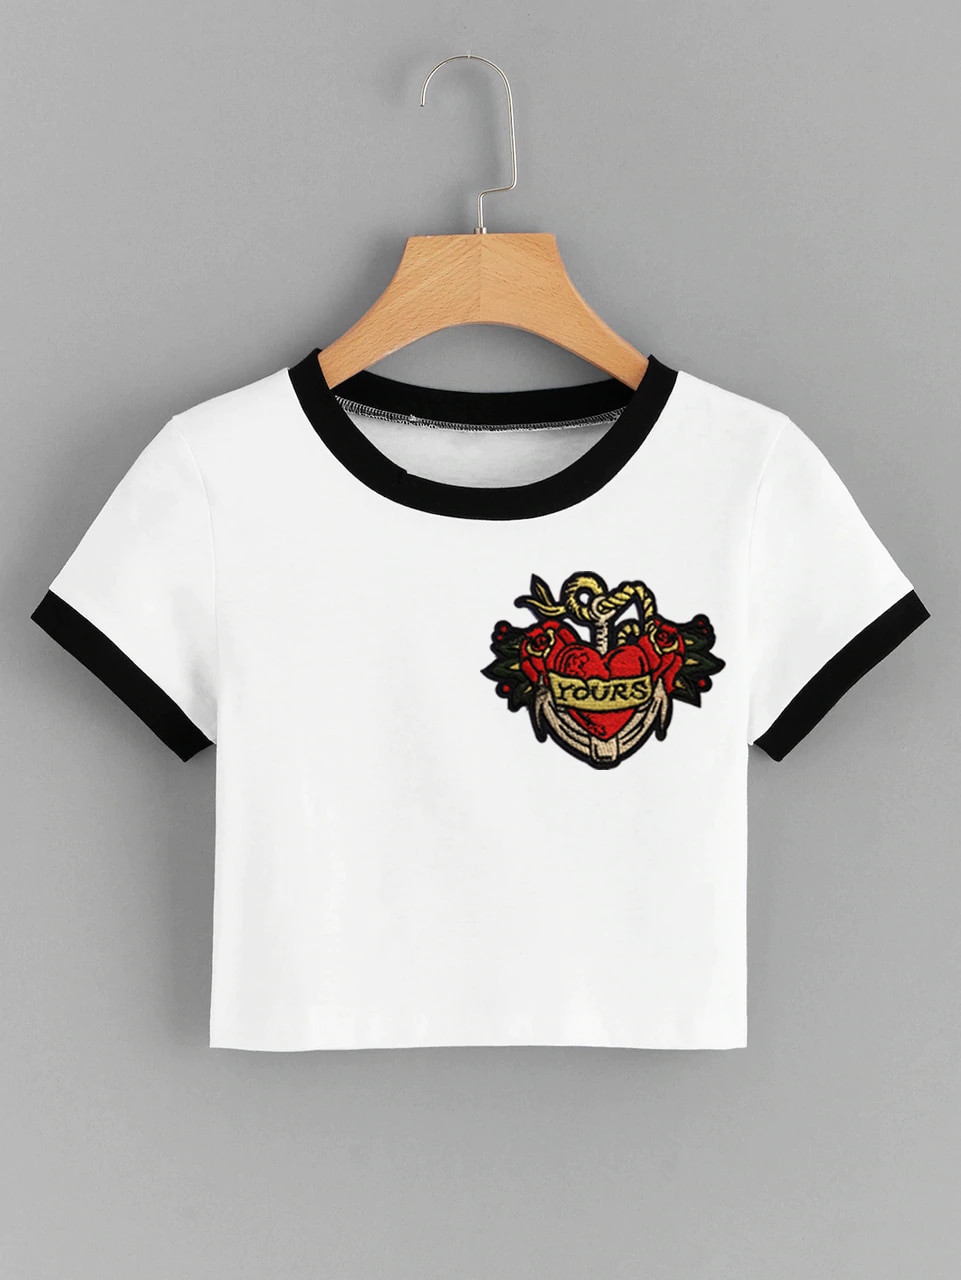 /2019/06/fifth-avenue-womens-sts57-ripzt31-embroidered-crop-ringer-t-shirt-white-and-black-image1.jpeg